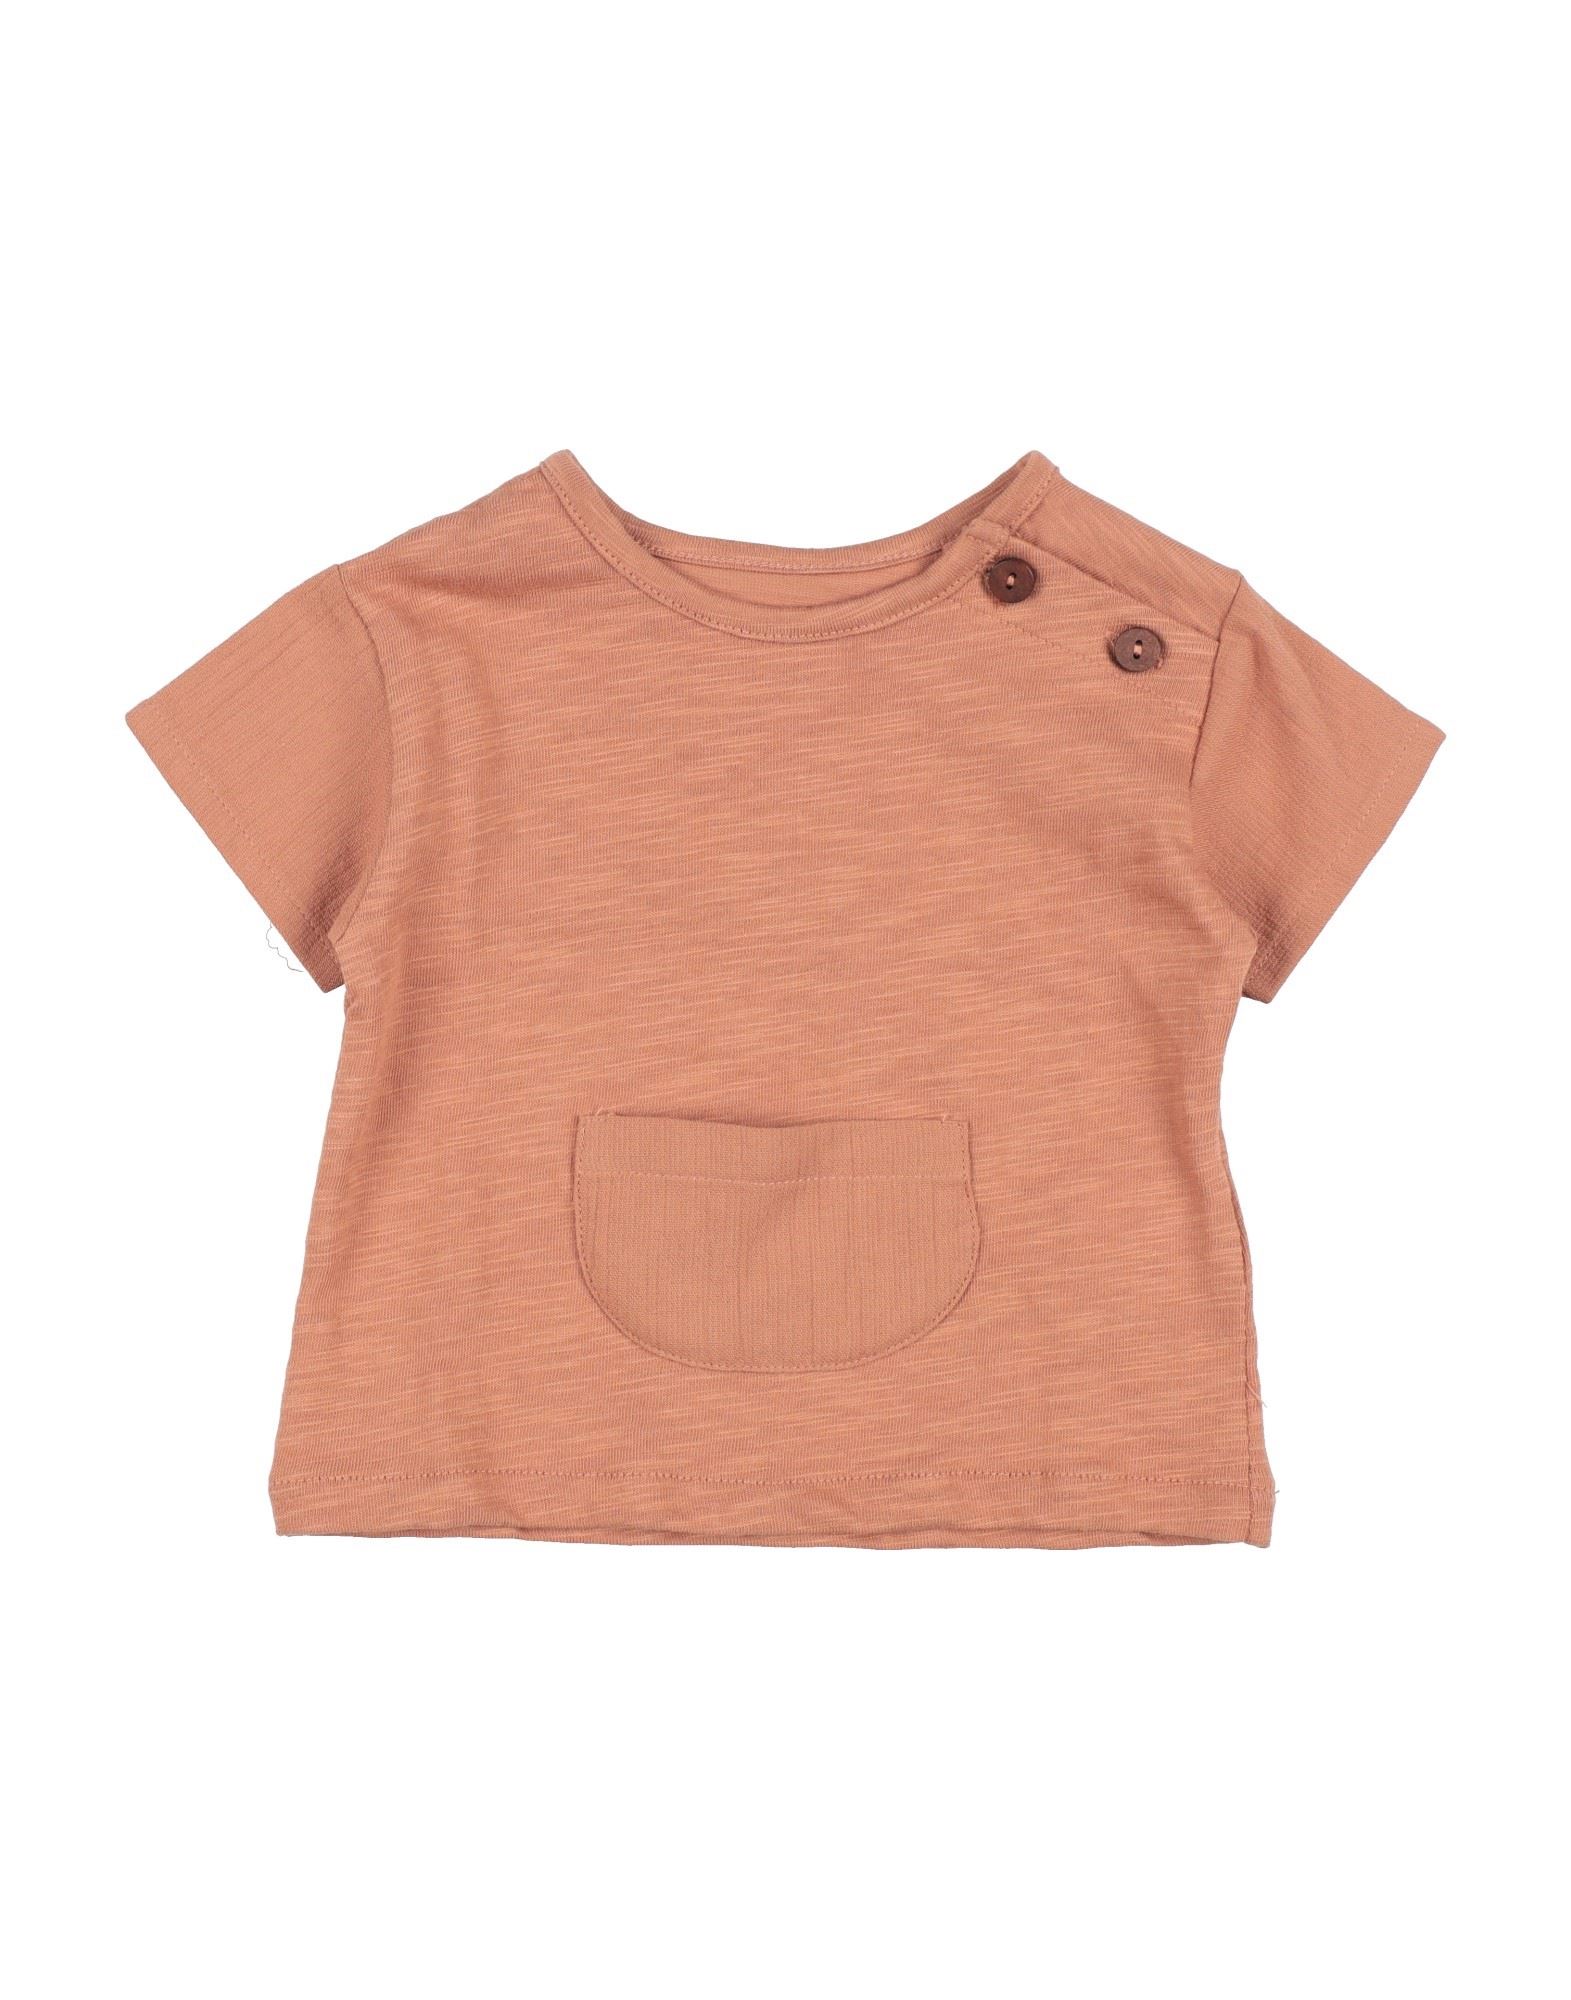 Play Up Kids' T-shirts In Brown